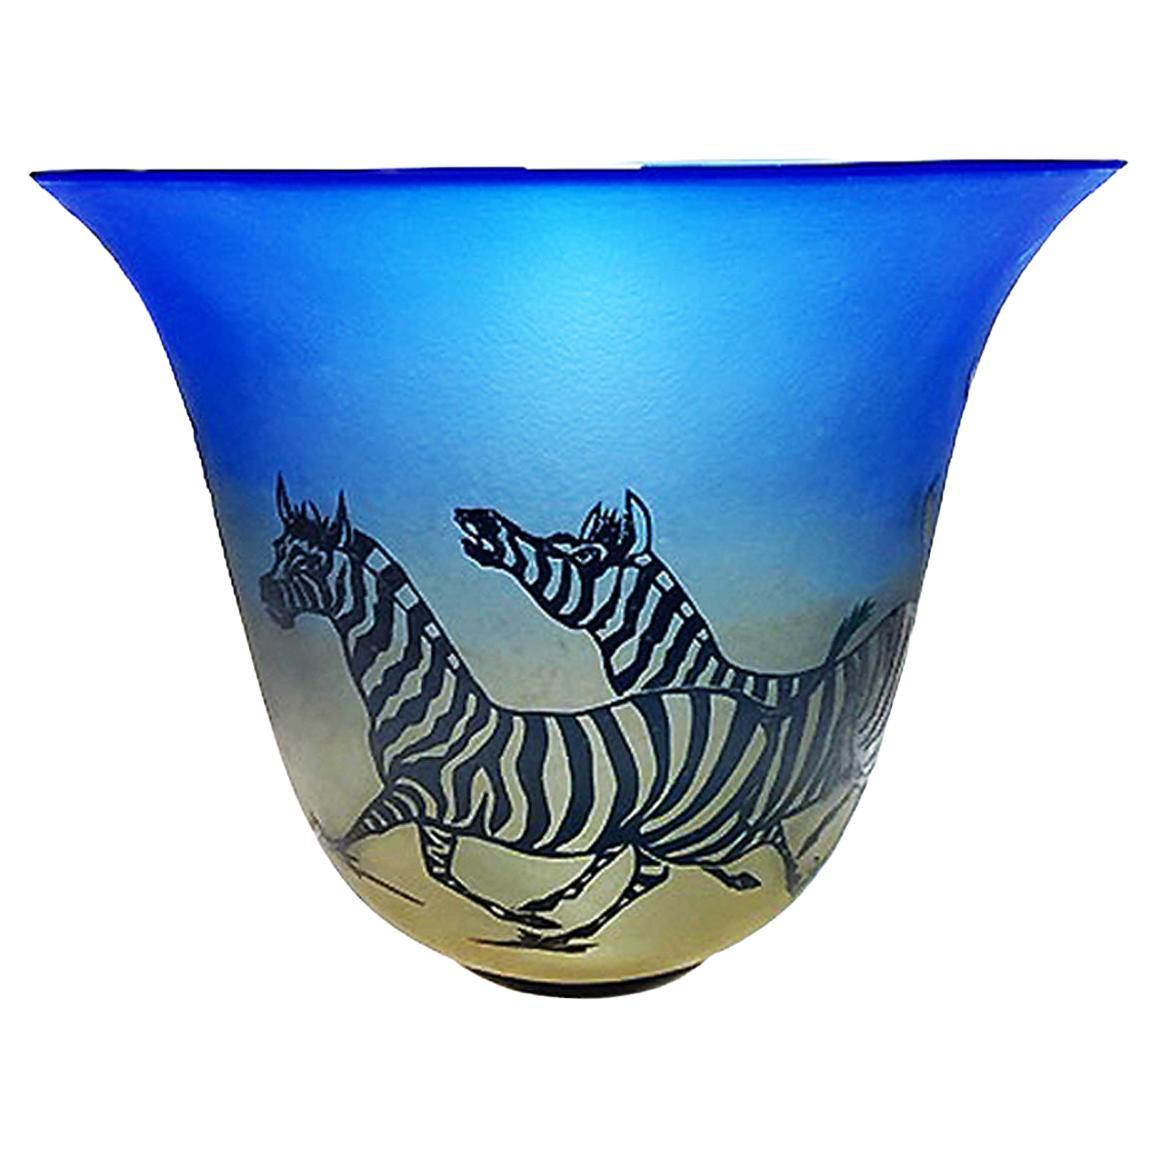 Overlay Cameo etched Vessel with Zebra- Number 10 of 50(Limited Series)